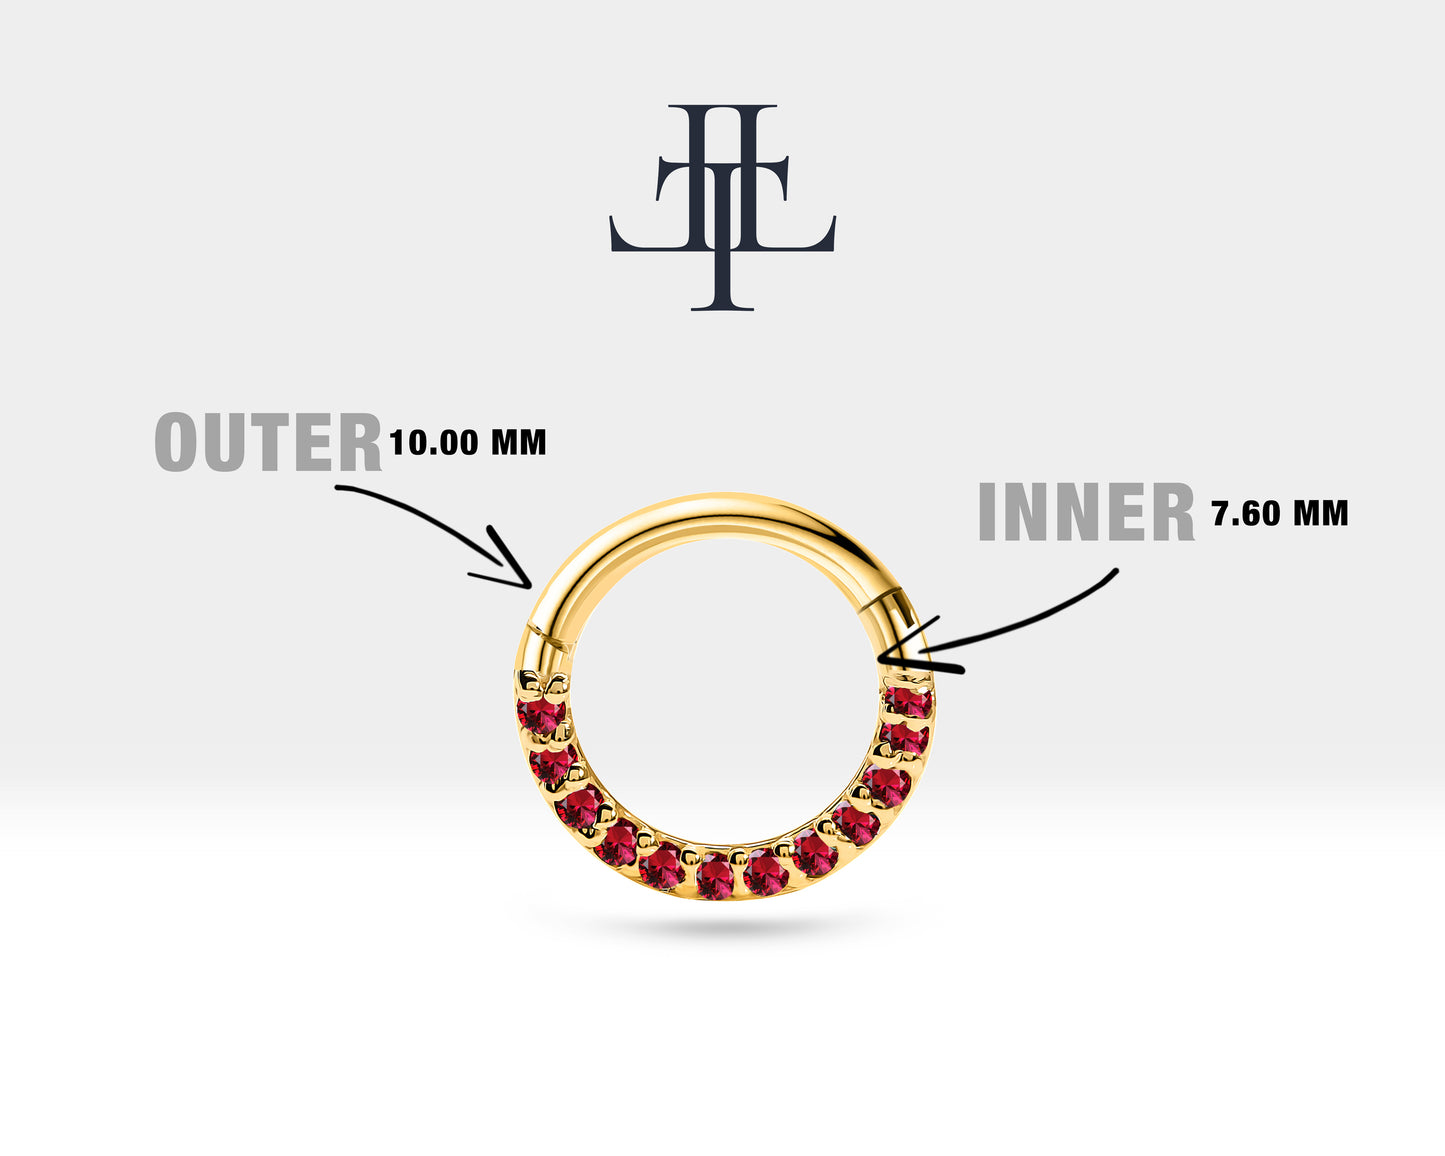 Cartilage Hoop Sequencing Design Ruby Clicker Piercing,Single Earring,14K Gold,16G(1.2mm)